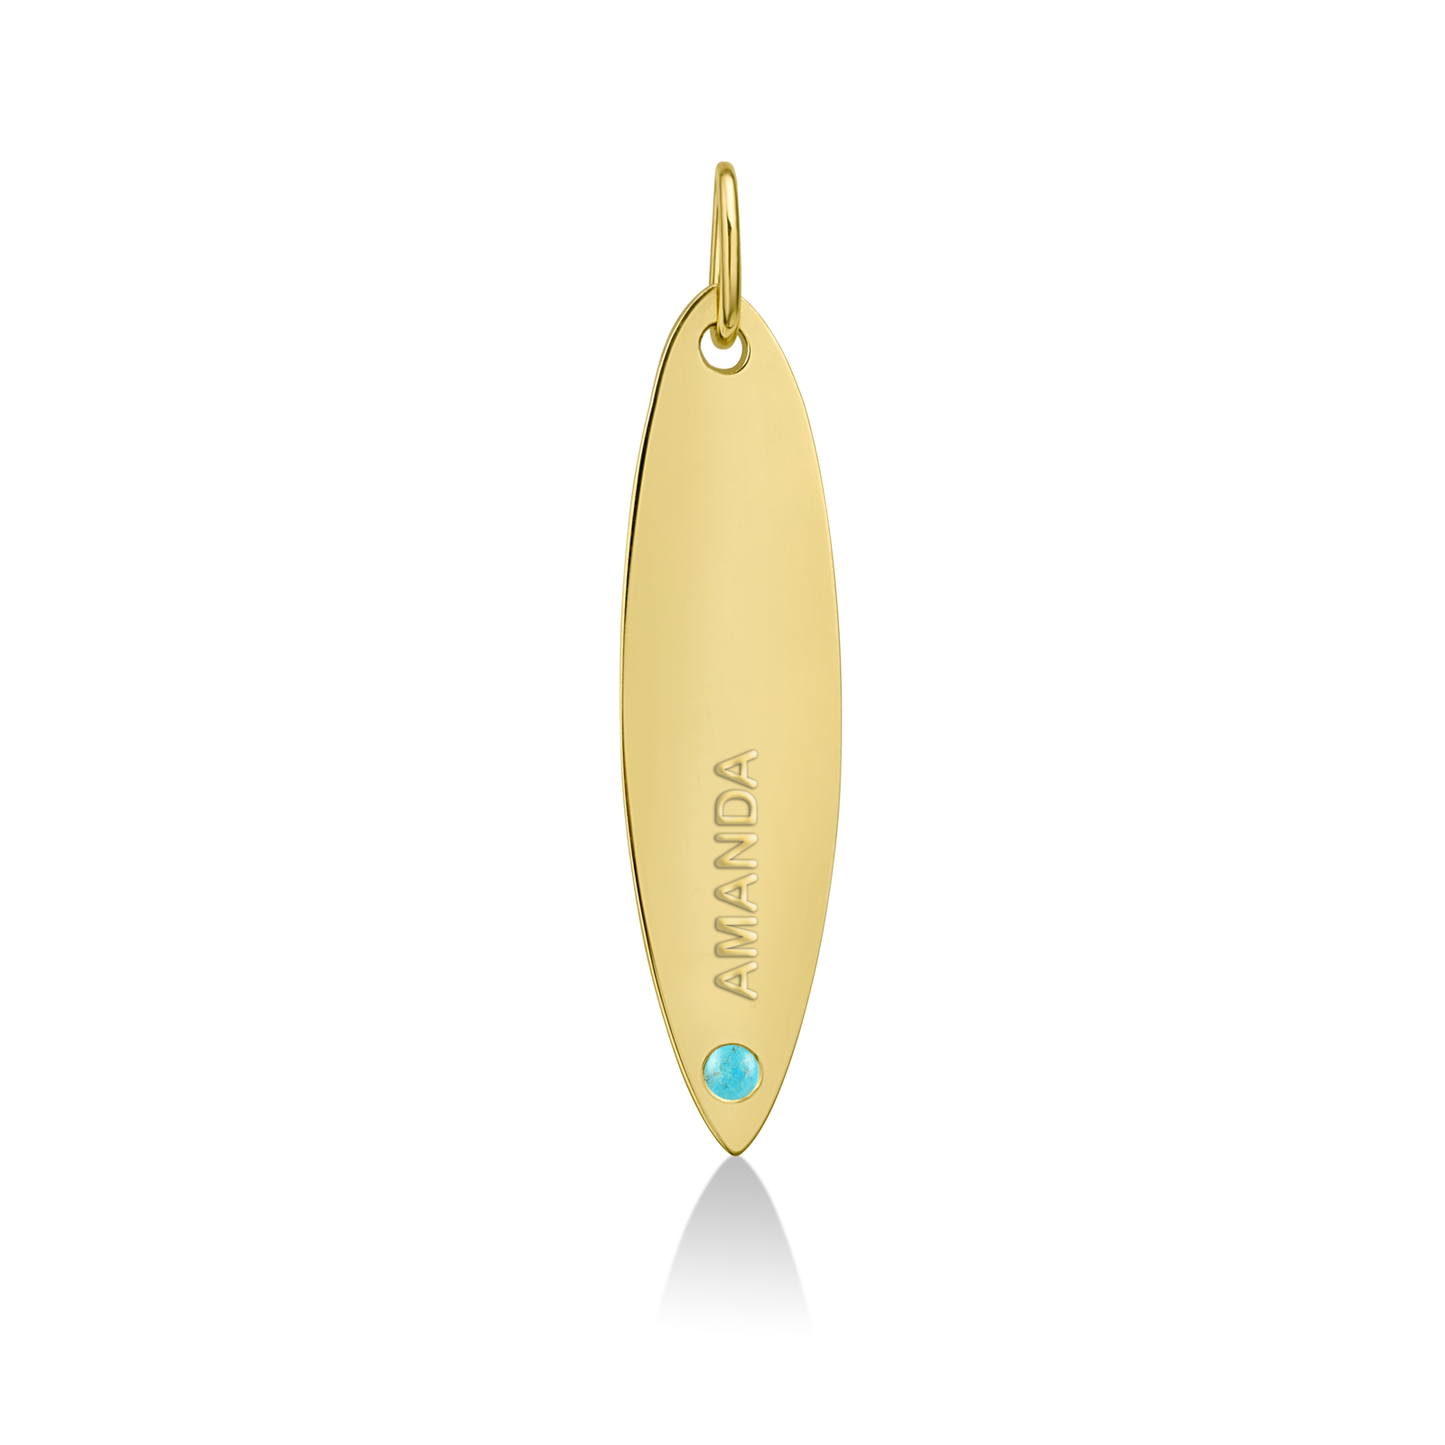 14k gold surfboard charm lock with AMANDA engraved and turquoise